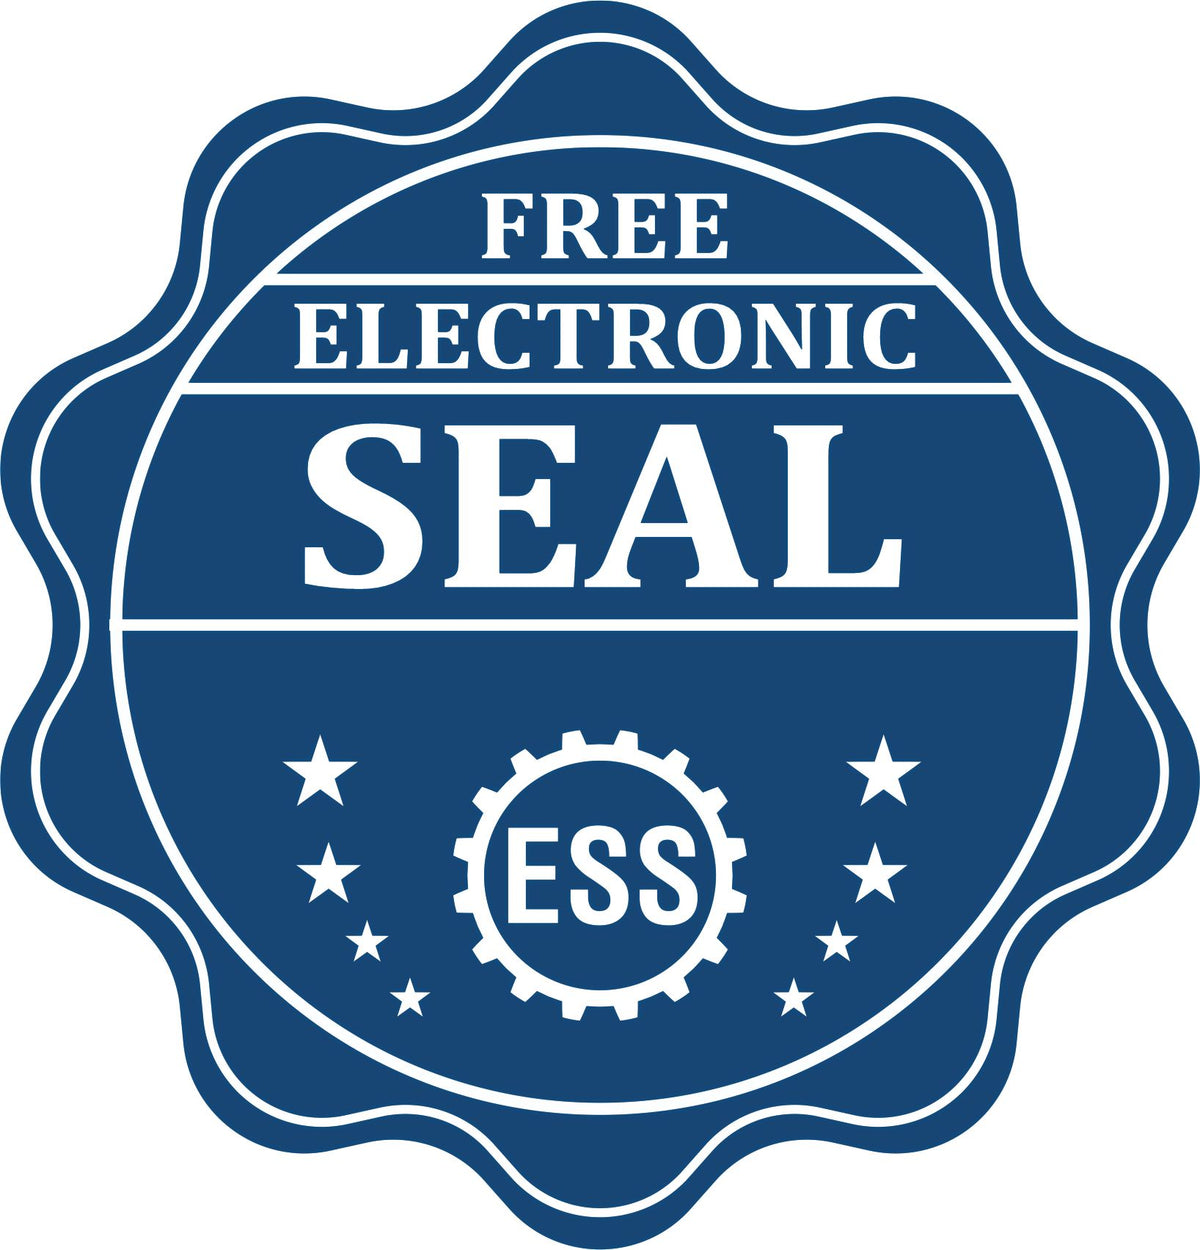 A badge showing a free electronic seal for the Gift Idaho Geologist Seal with stars and the ESS gear on the emblem.